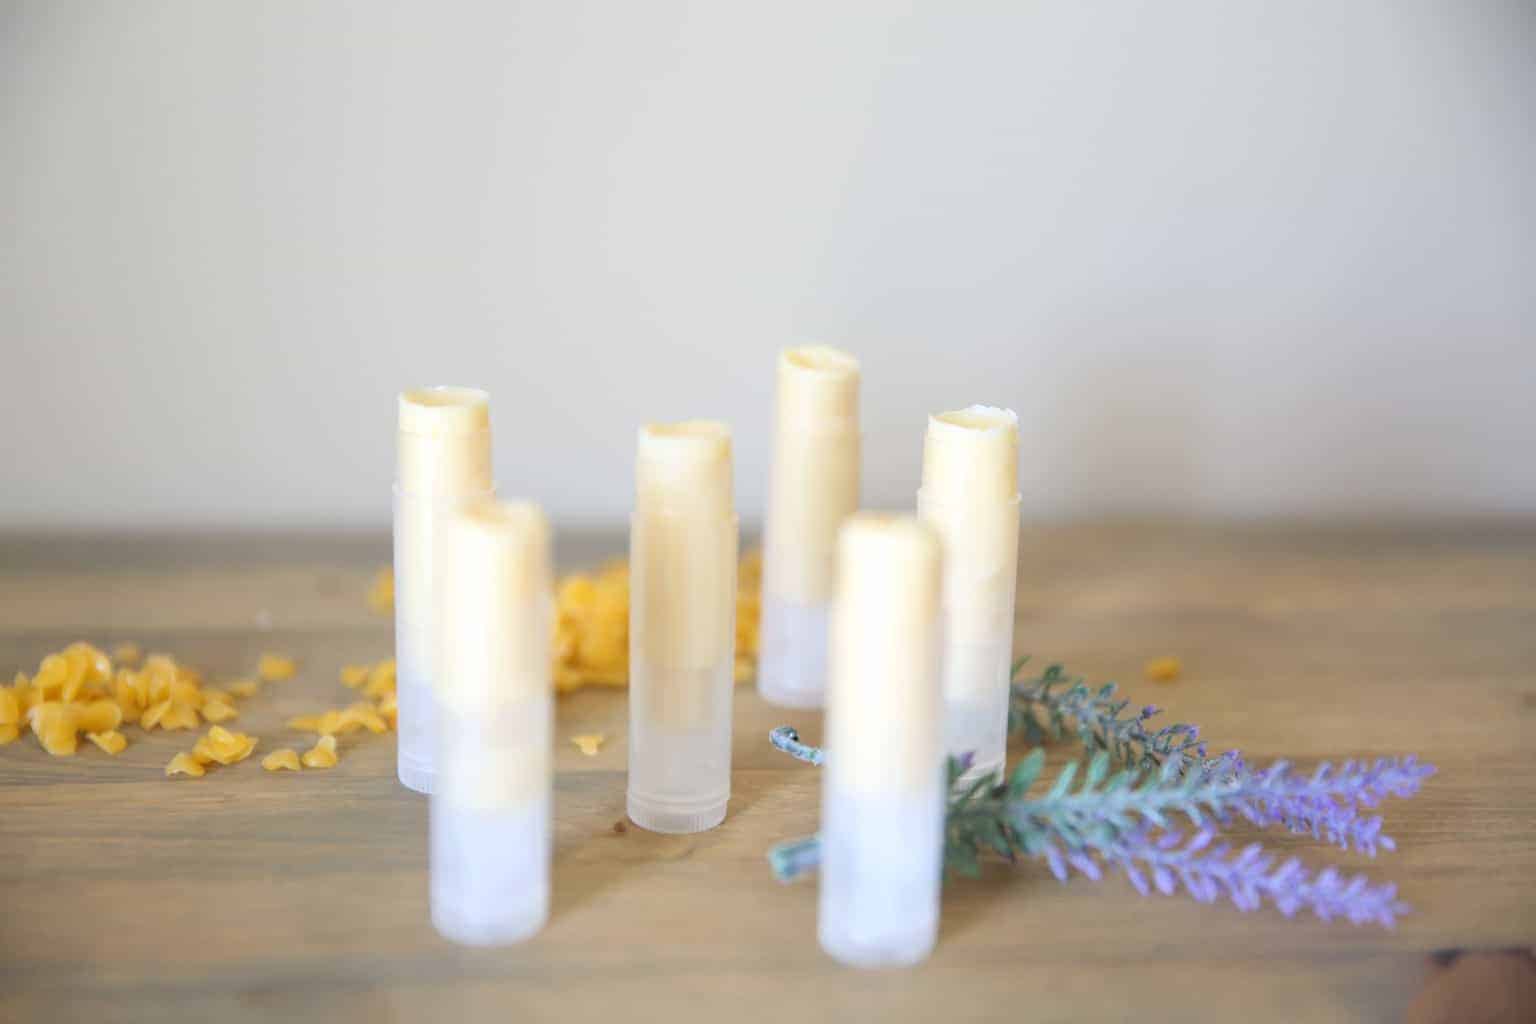 freshly made homemade lip balm in chapstick tubes surrounded by lavender sprigs